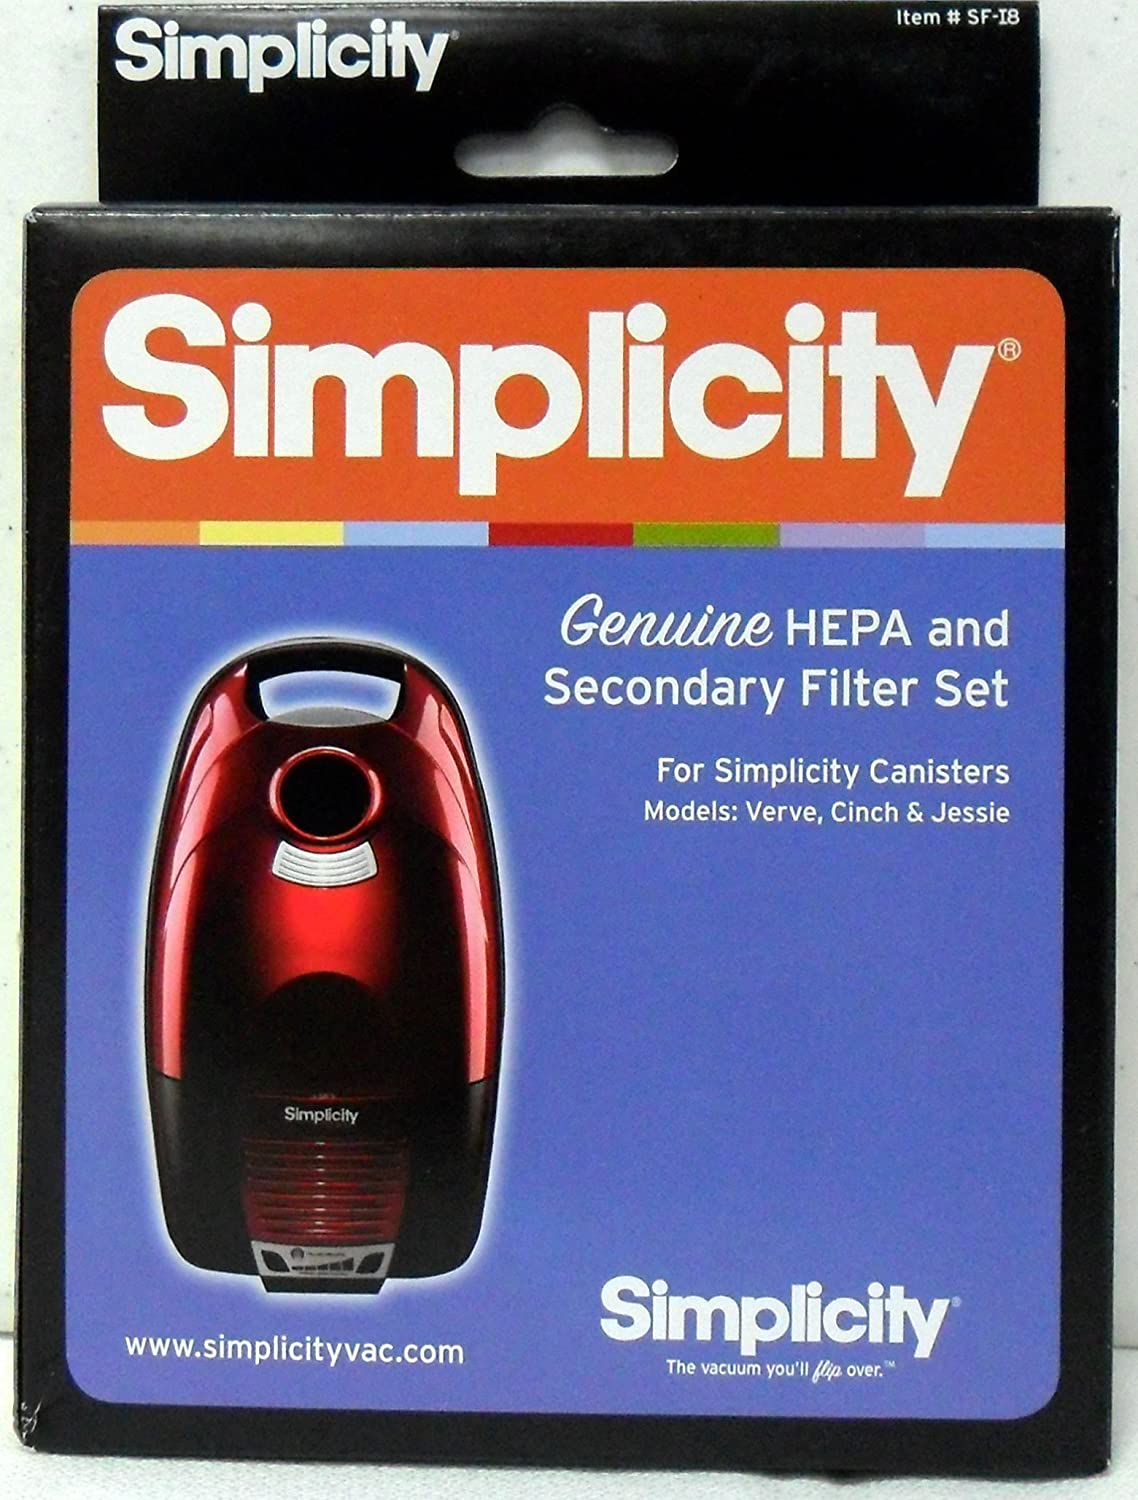 Simplicity Canister SF-I8 Filter set